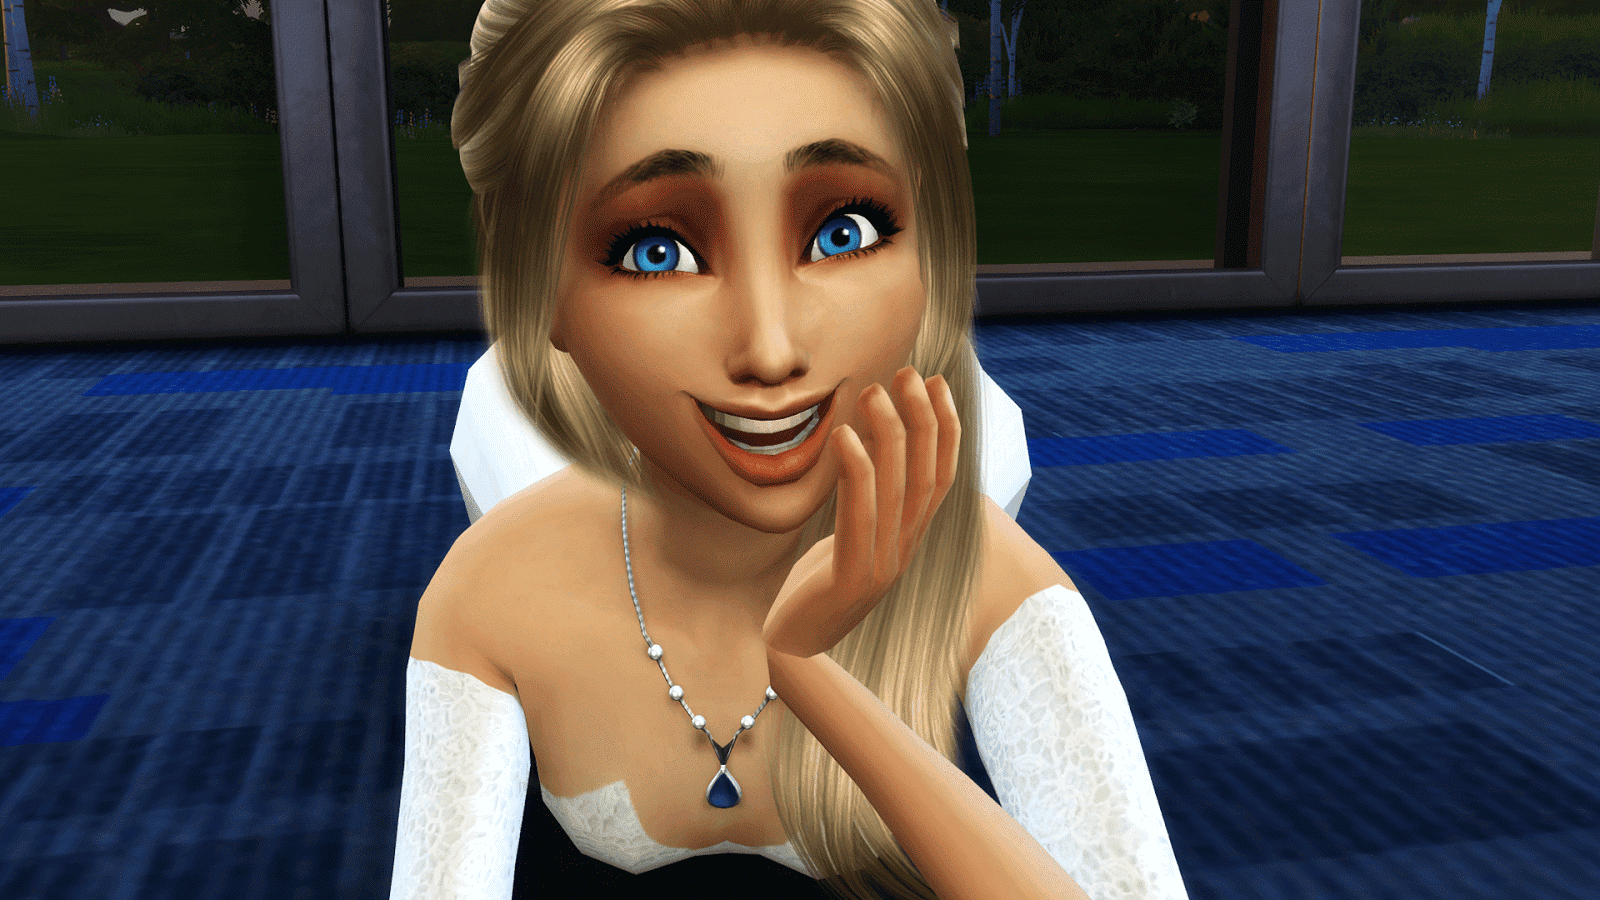 sims 4 selfie replacement poses